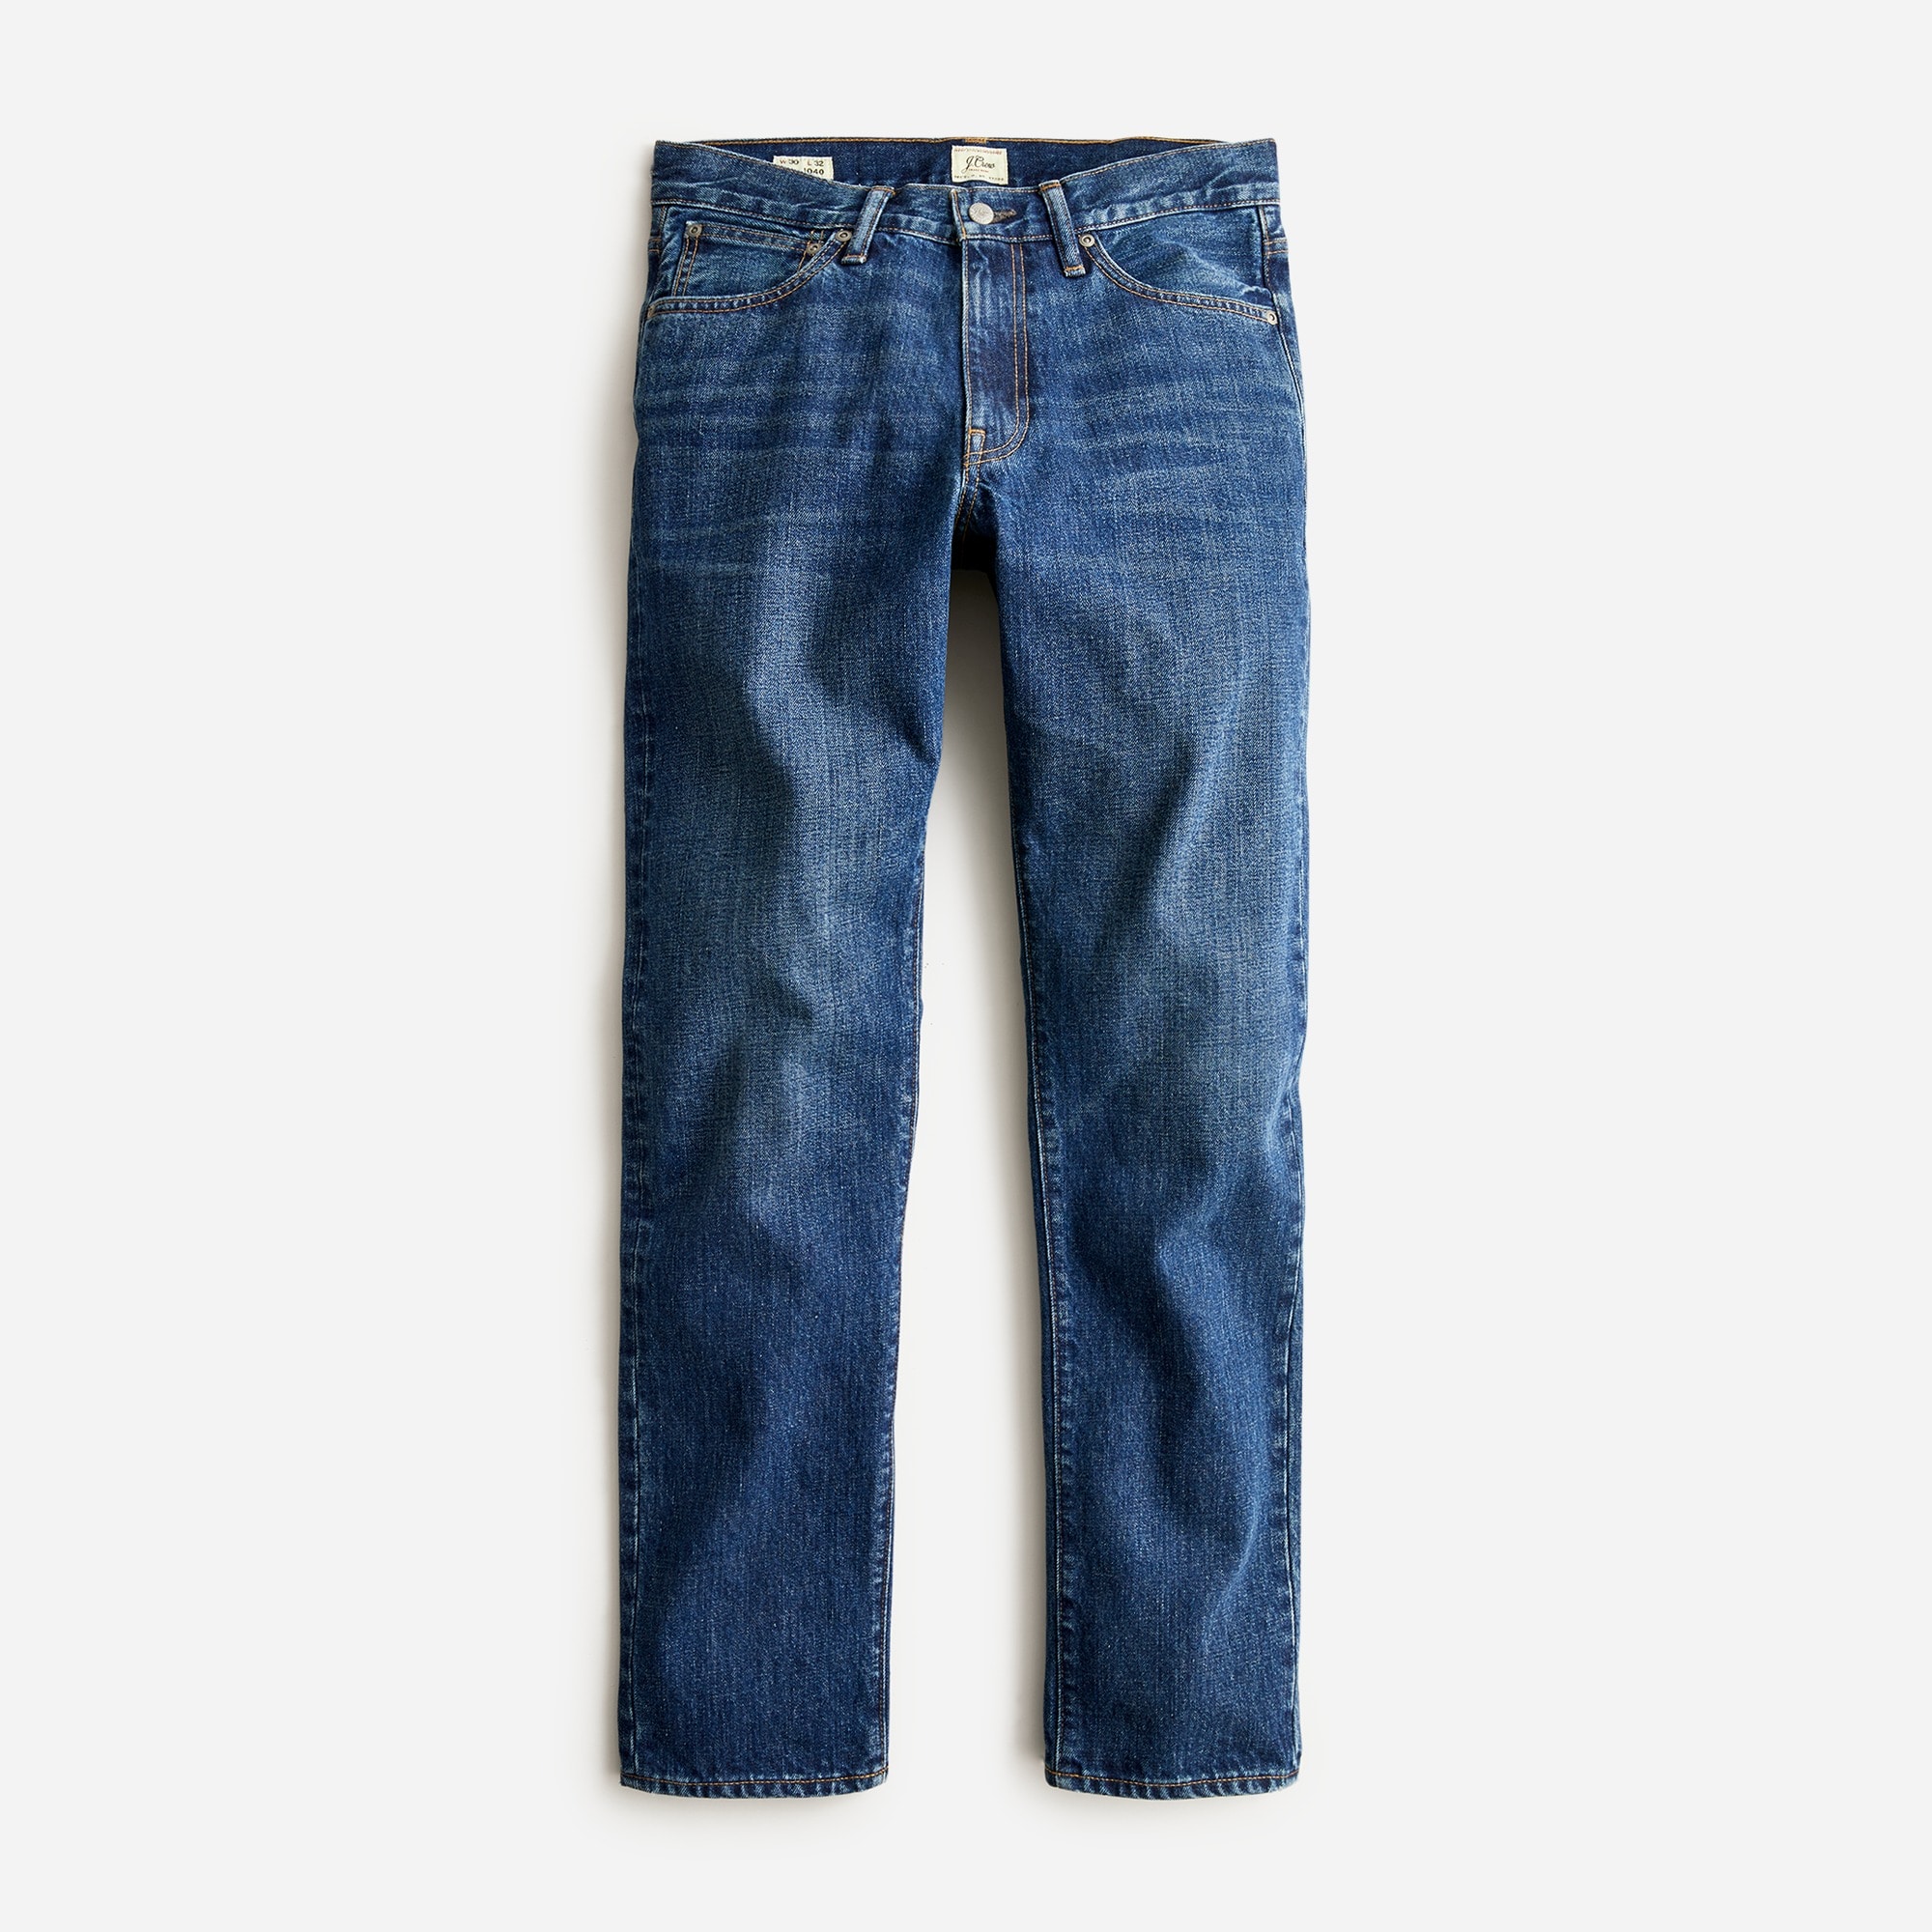  1040 Athletic Tapered-fit jean in one-year wash